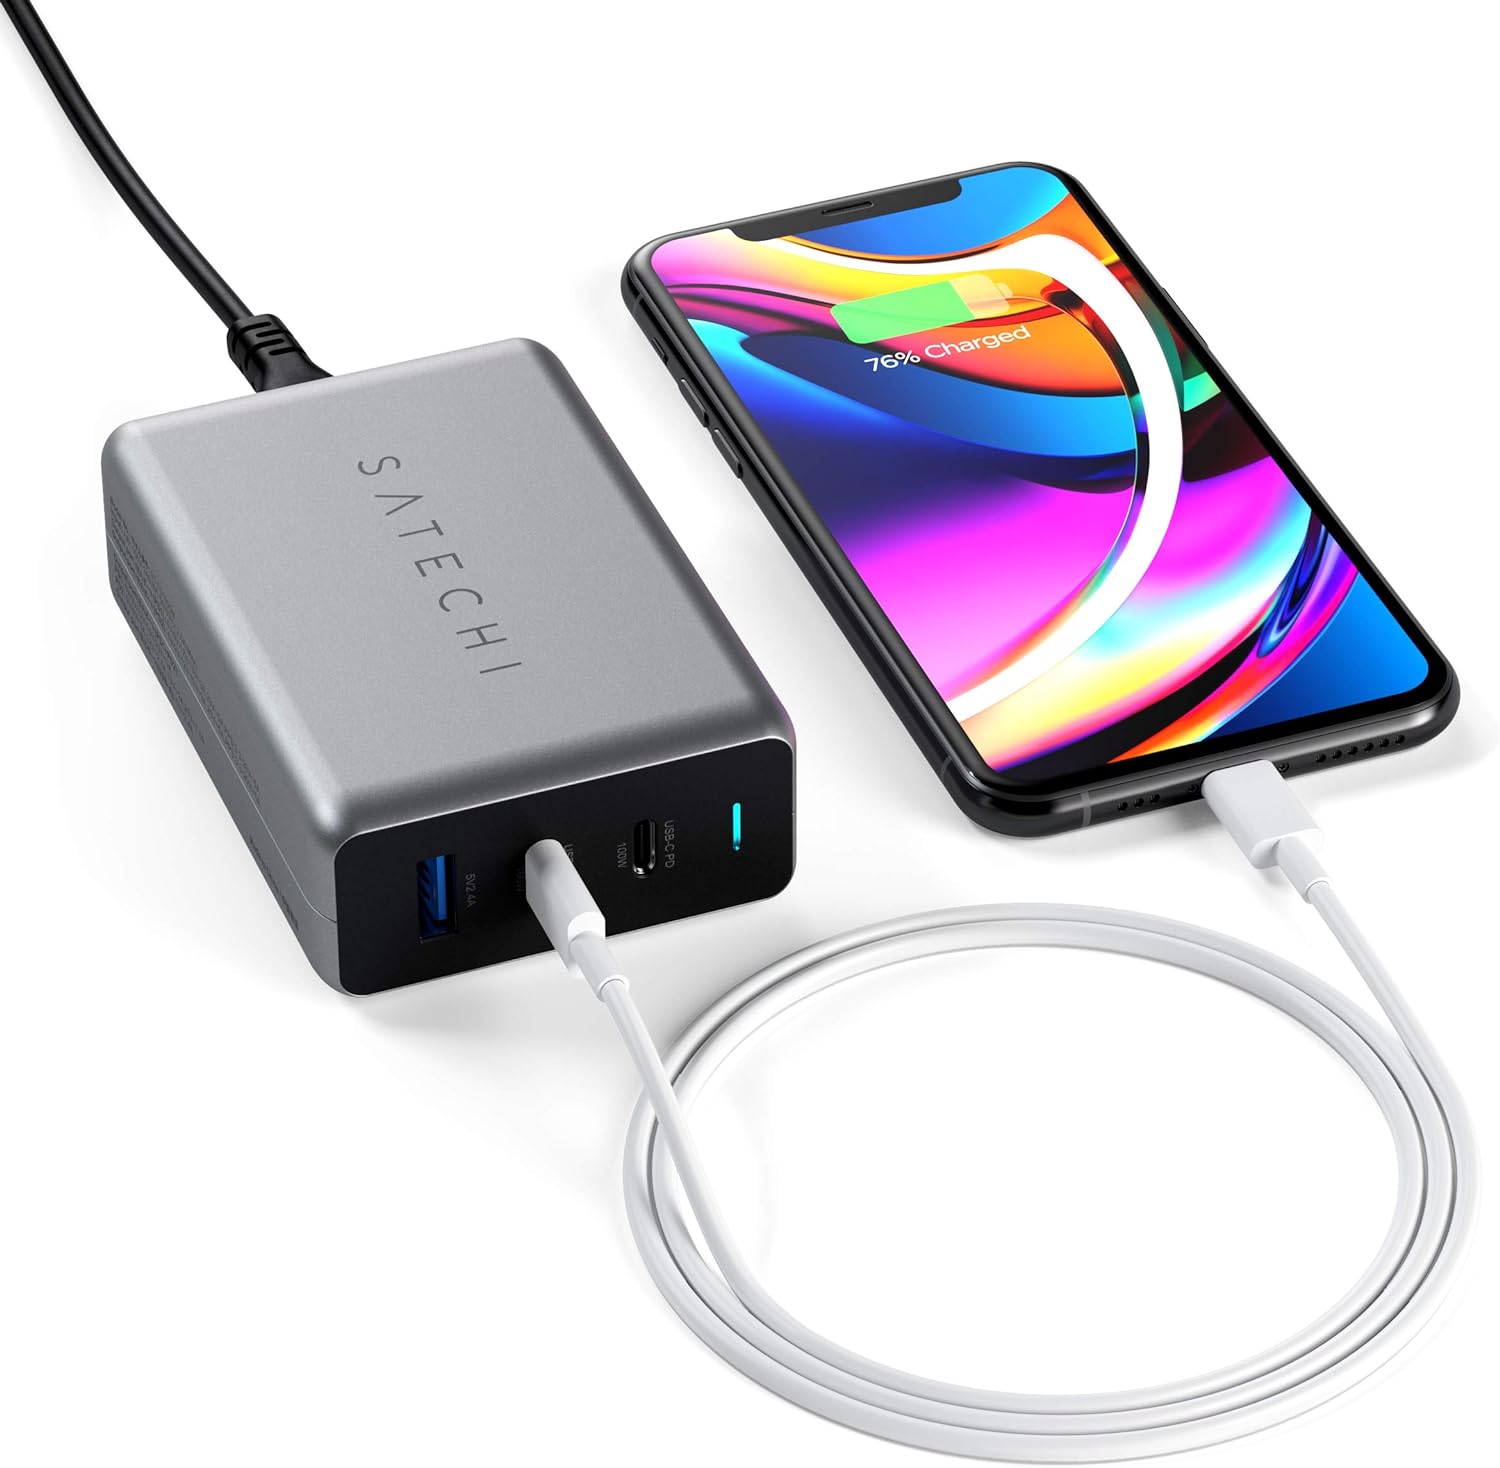 Satechi 100W USB C PD Compact GaN Charger – Powerful GaN Tech – Compatible with 2022 MacBook Pro/Air M2, 2021 MacBook Pro M1, 2022 iPad Air M1, 2021 iPad Pro M1, iPhone 15 Pro Max/15 Pro/15/15 Plus